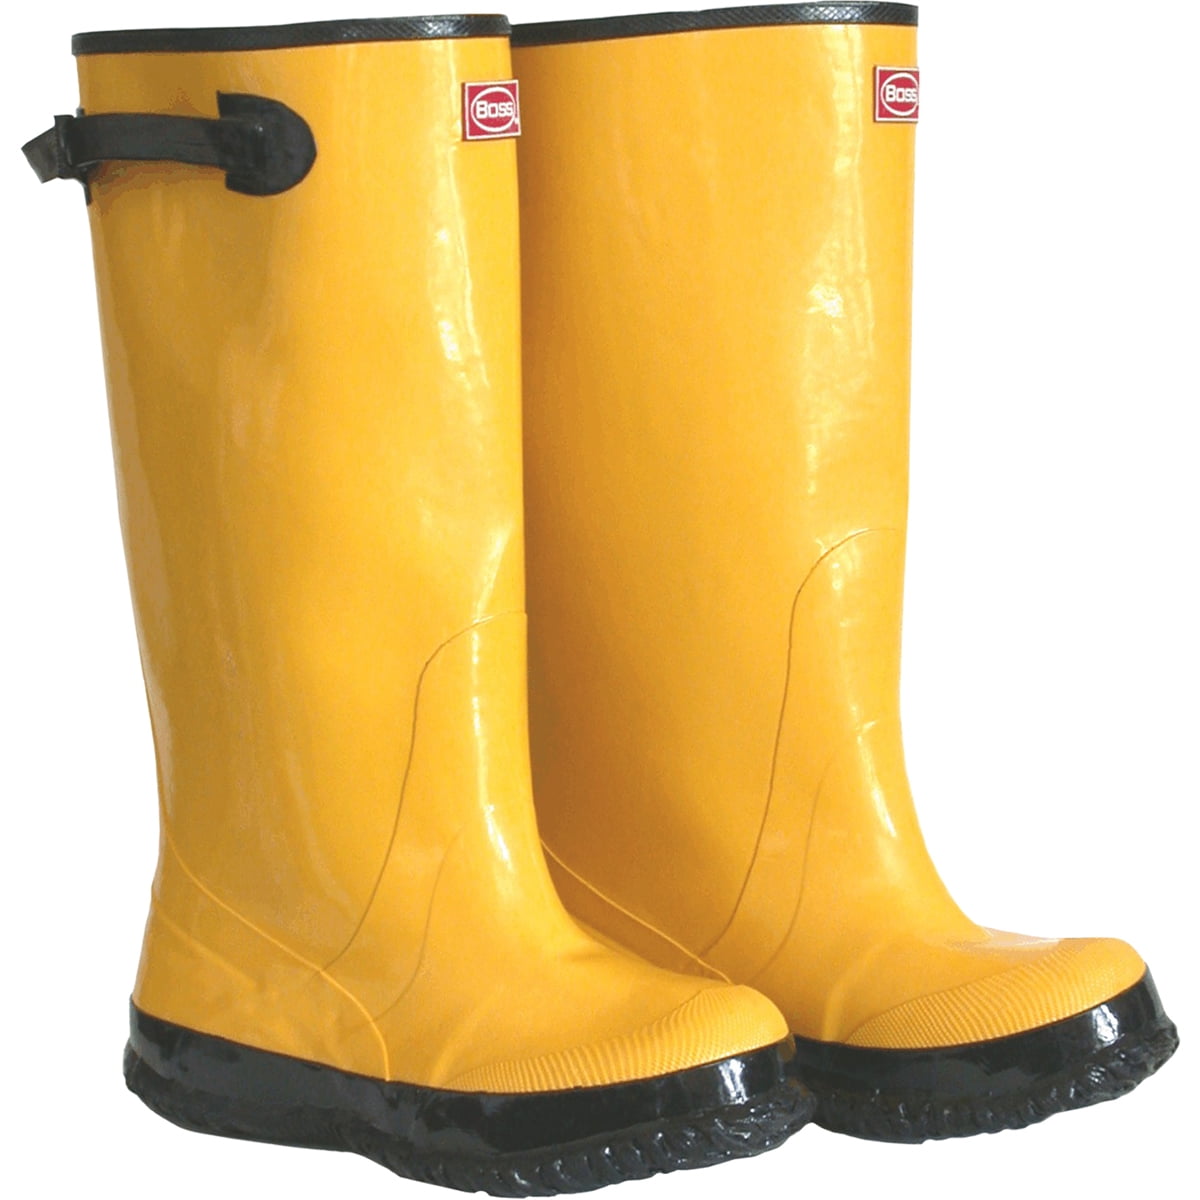 Large/X-Large Treds 14855 Over-The-Shoe Rubber Boots One Pair 12-Inch Overboot